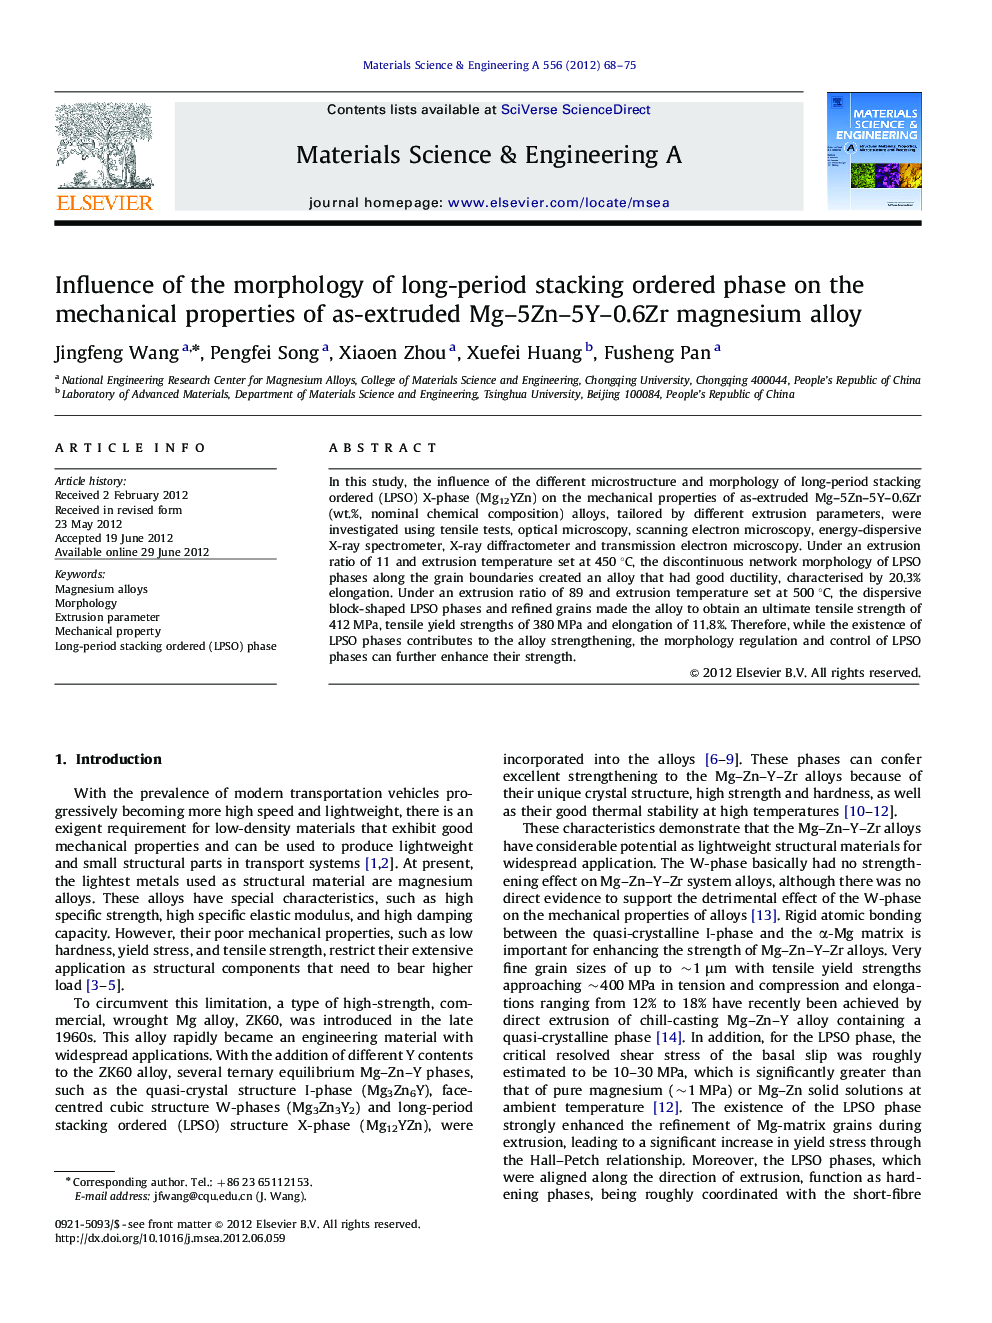 Influence of the morphology of long-period stacking ordered phase on the mechanical properties of as-extruded Mg–5Zn–5Y–0.6Zr magnesium alloy